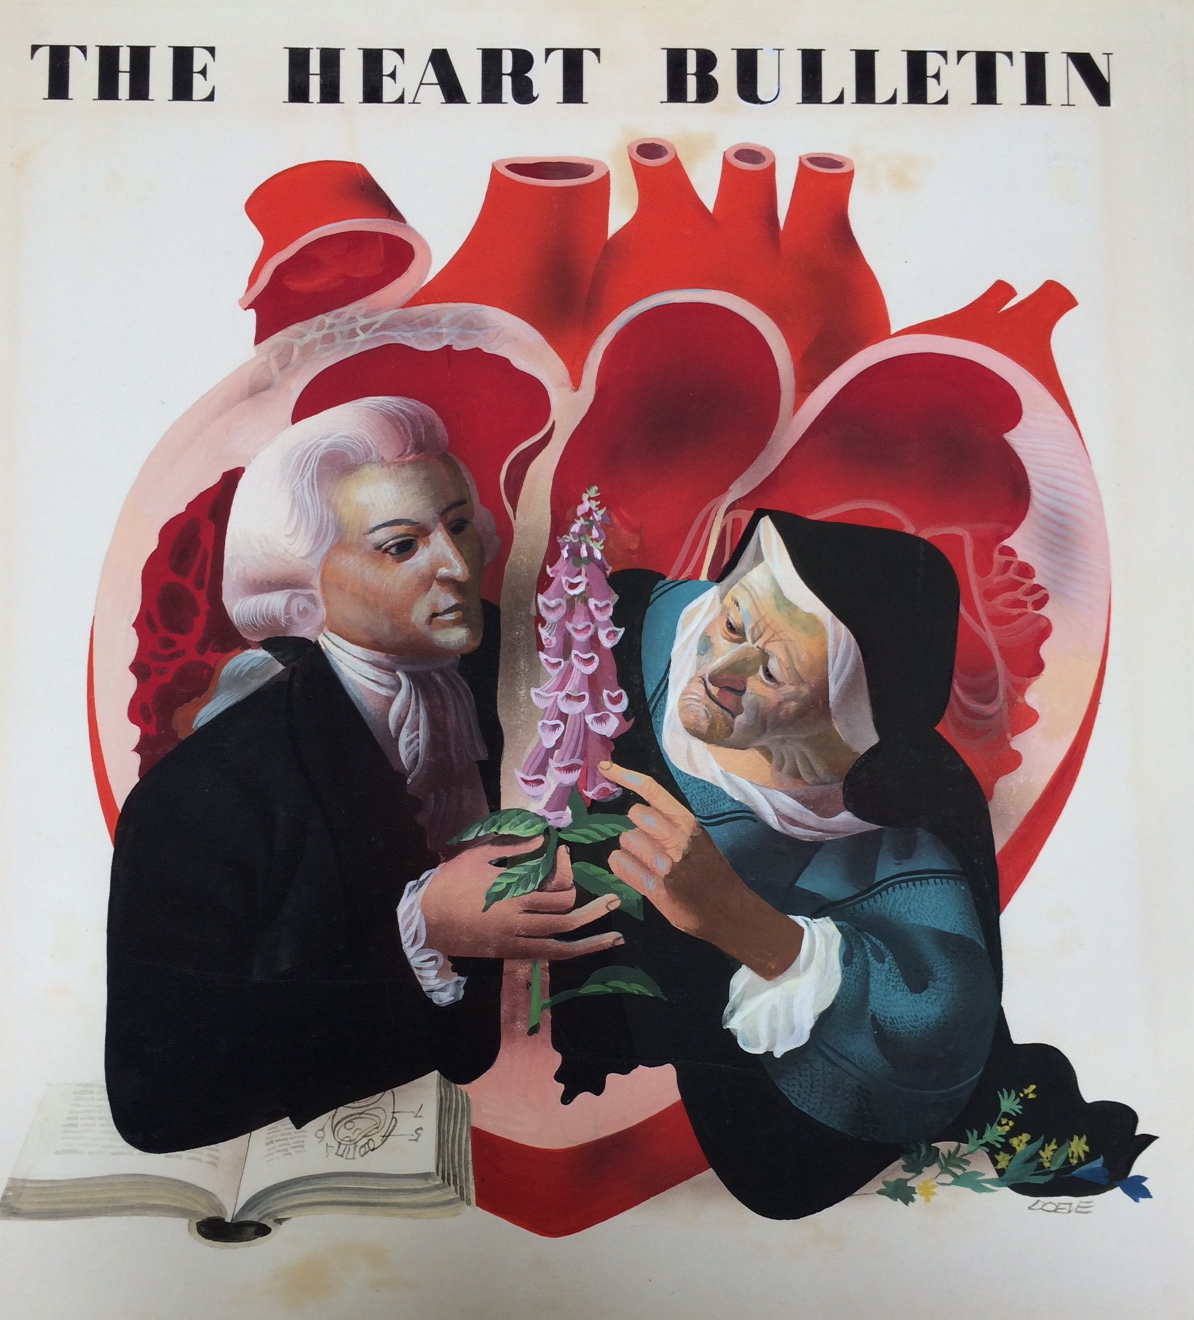 A painting of Dr. William Withering, and an herb-woman with a foxglove plant, used as the cover for the first issue of the Heart Bulletin journal published by the Medical Arts Publishing Foundation